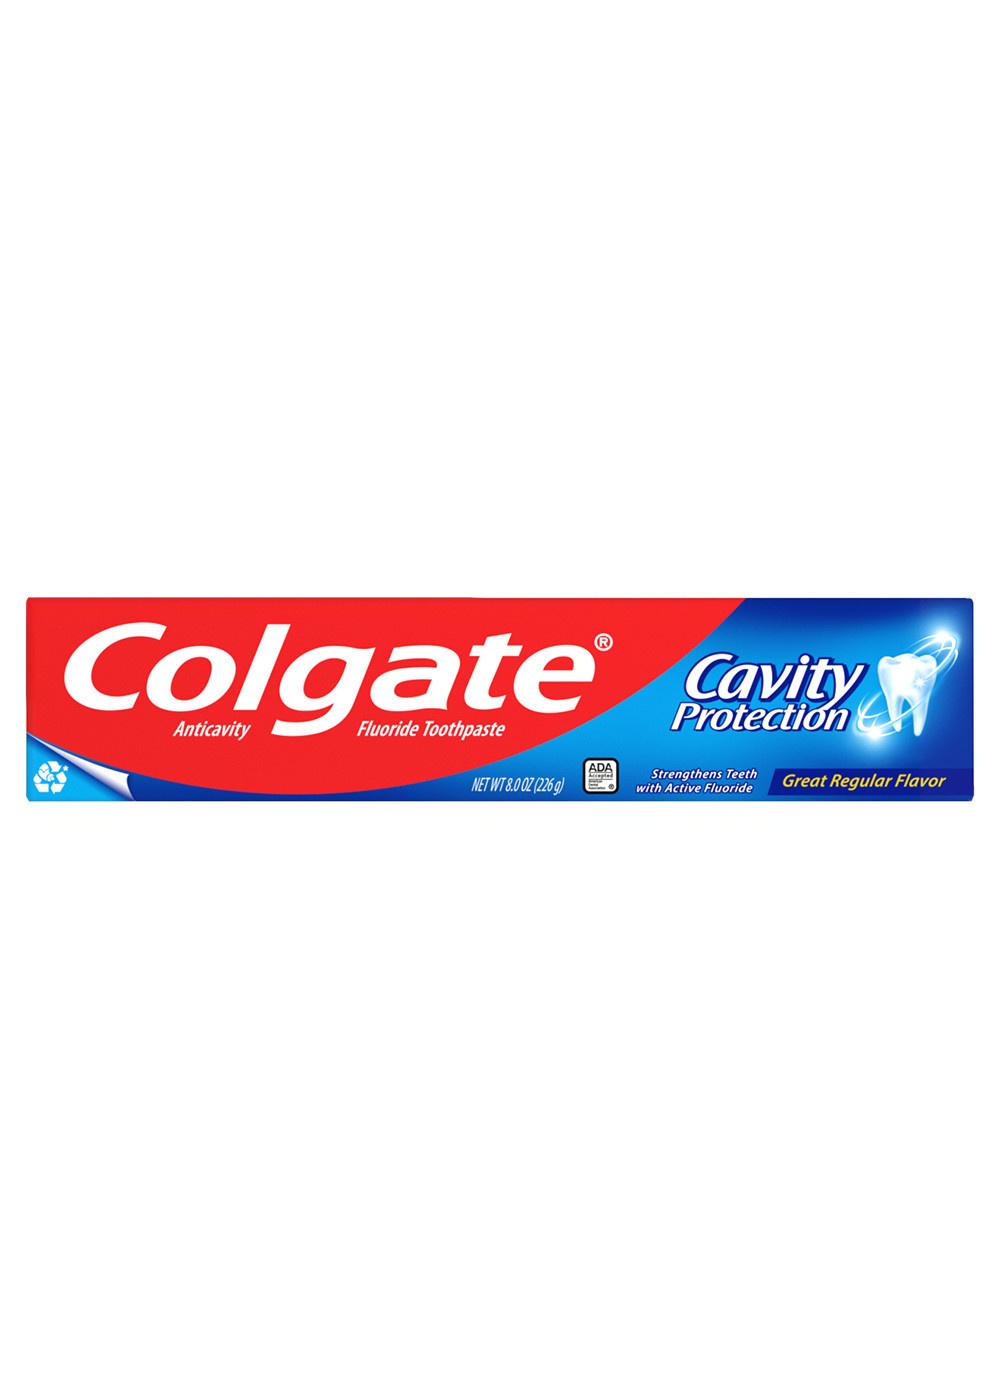 Colgate Cavity Protection Toothpaste; image 1 of 3